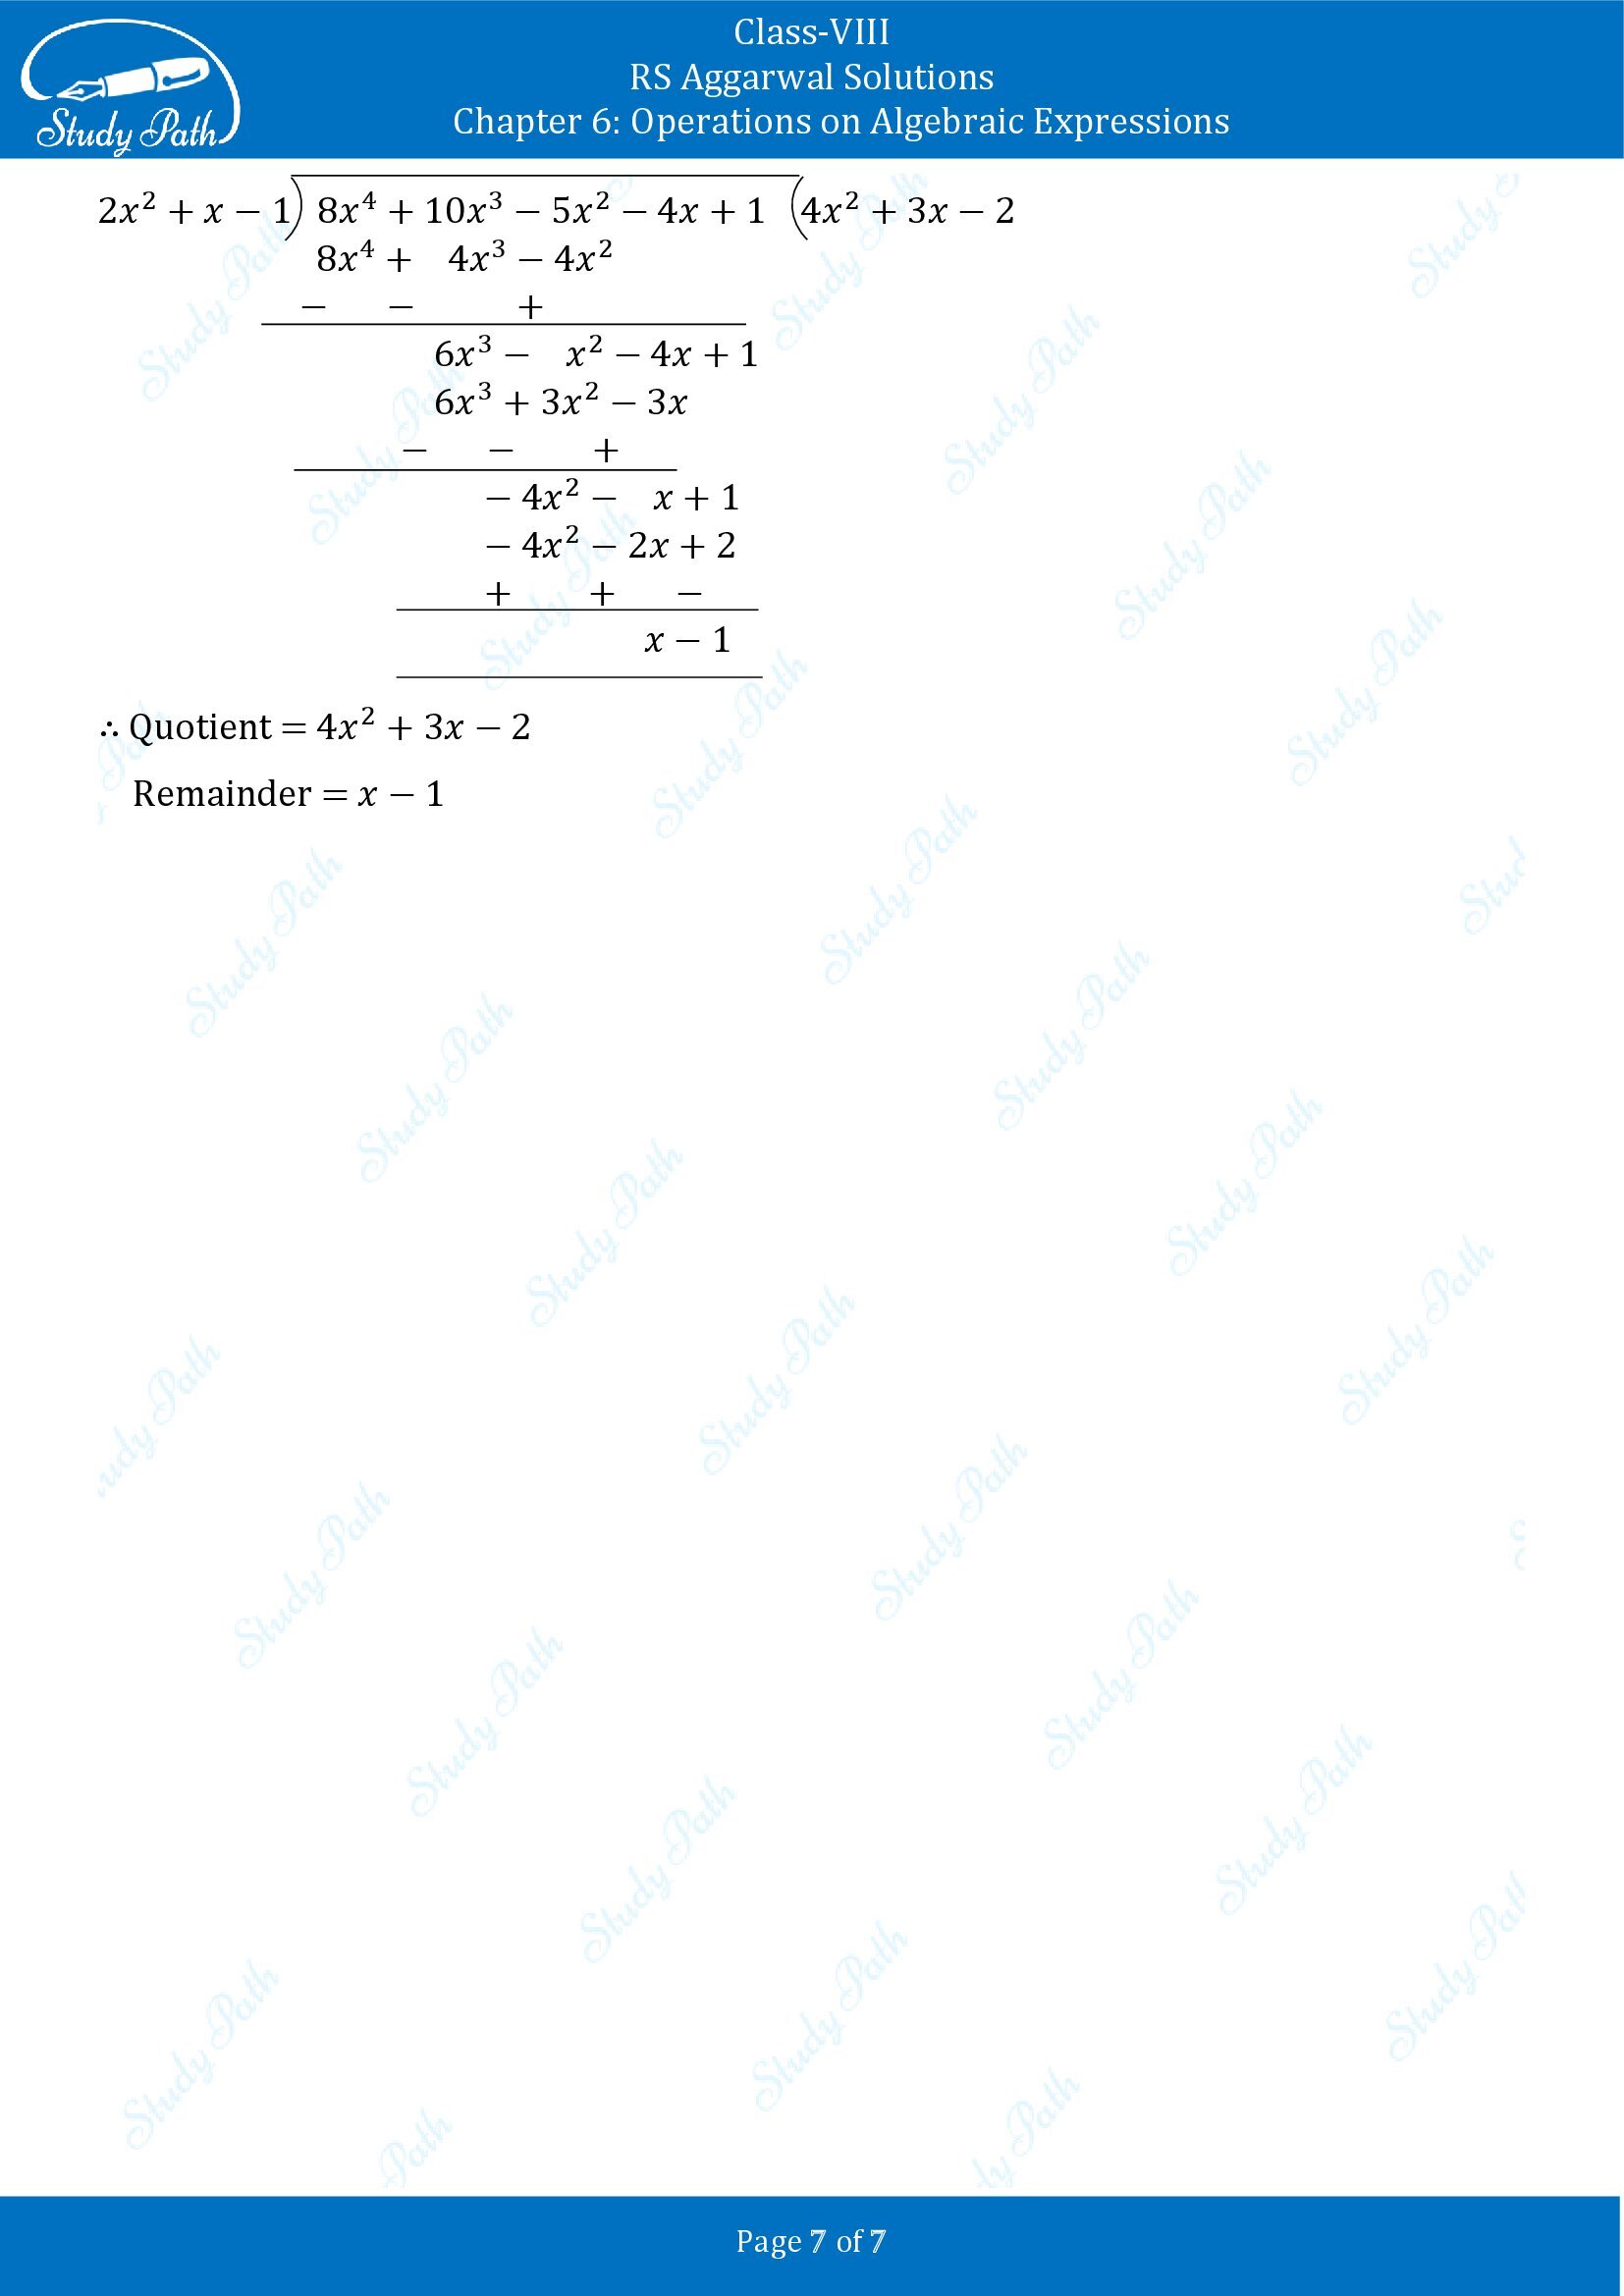 RS Aggarwal Solutions Class 8 Chapter 6 Operations on Algebraic Expressions Exercise 6C 00007